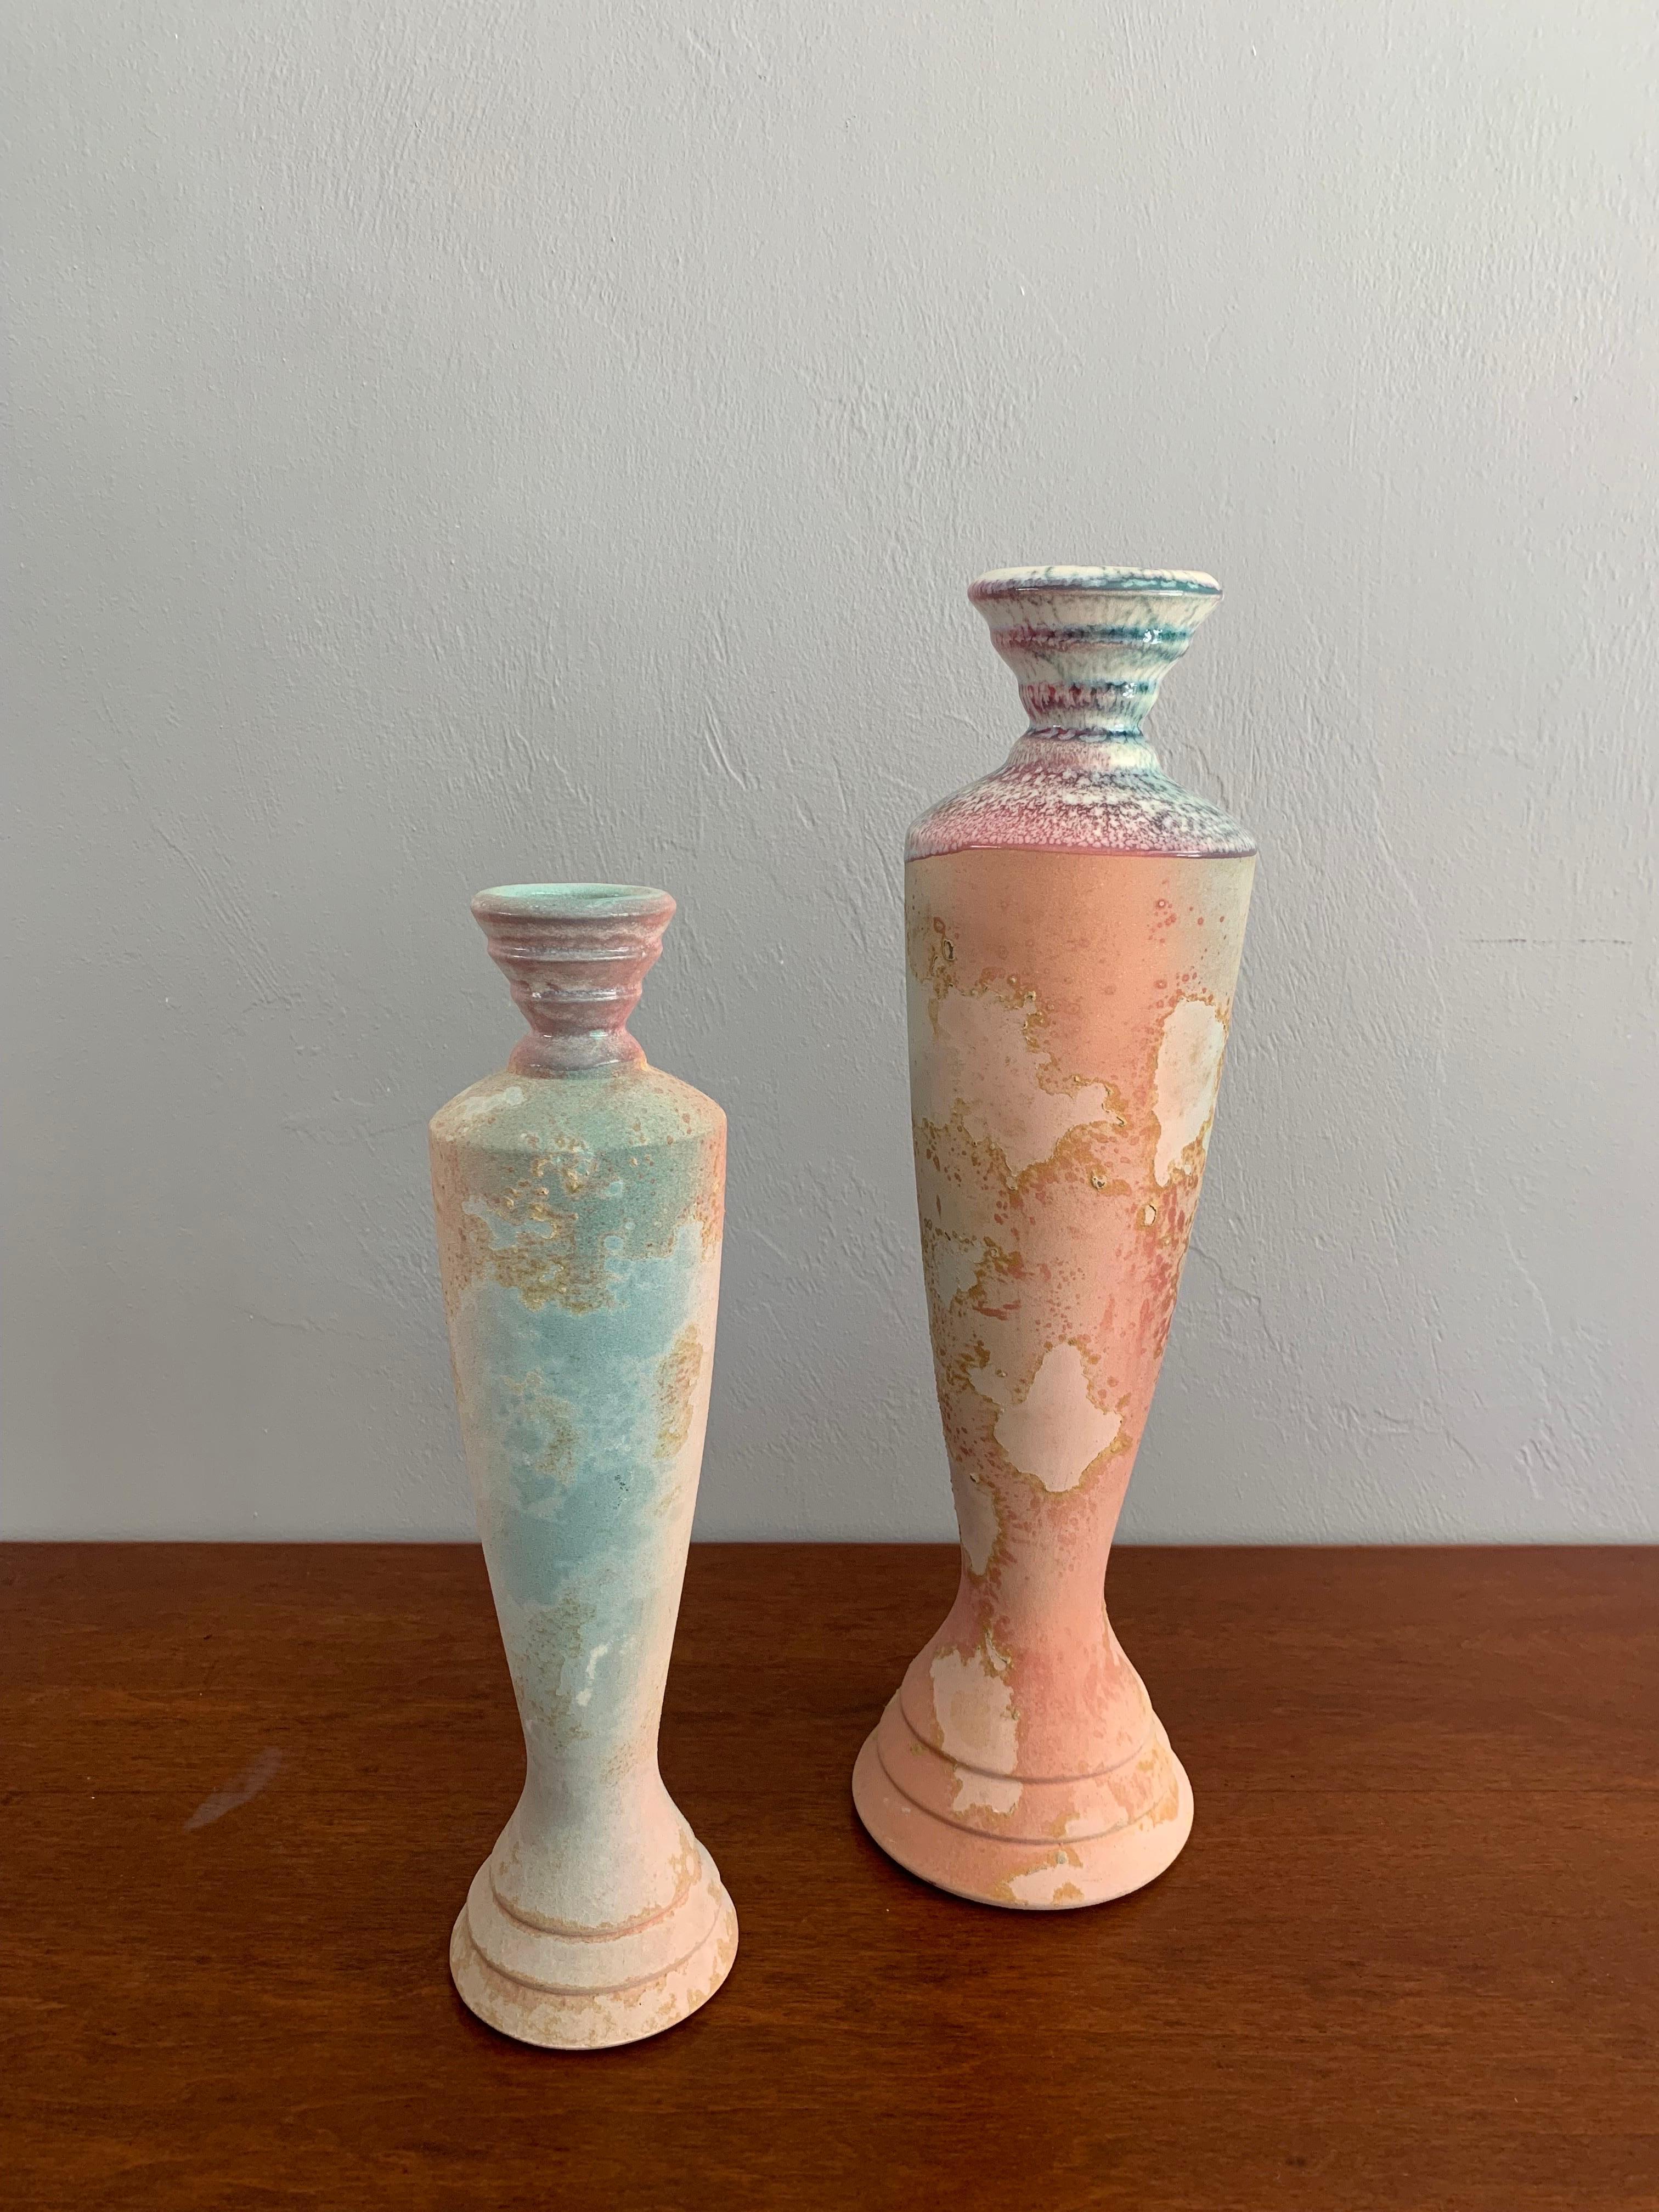 A beautiful set of multi-colored raku candlesticks. Done in the traditional raku style by famed American artist Tony Evans. The texture of the Raku in this almost vapor wave color scheme creates an almost map like pattern across each candlestick.